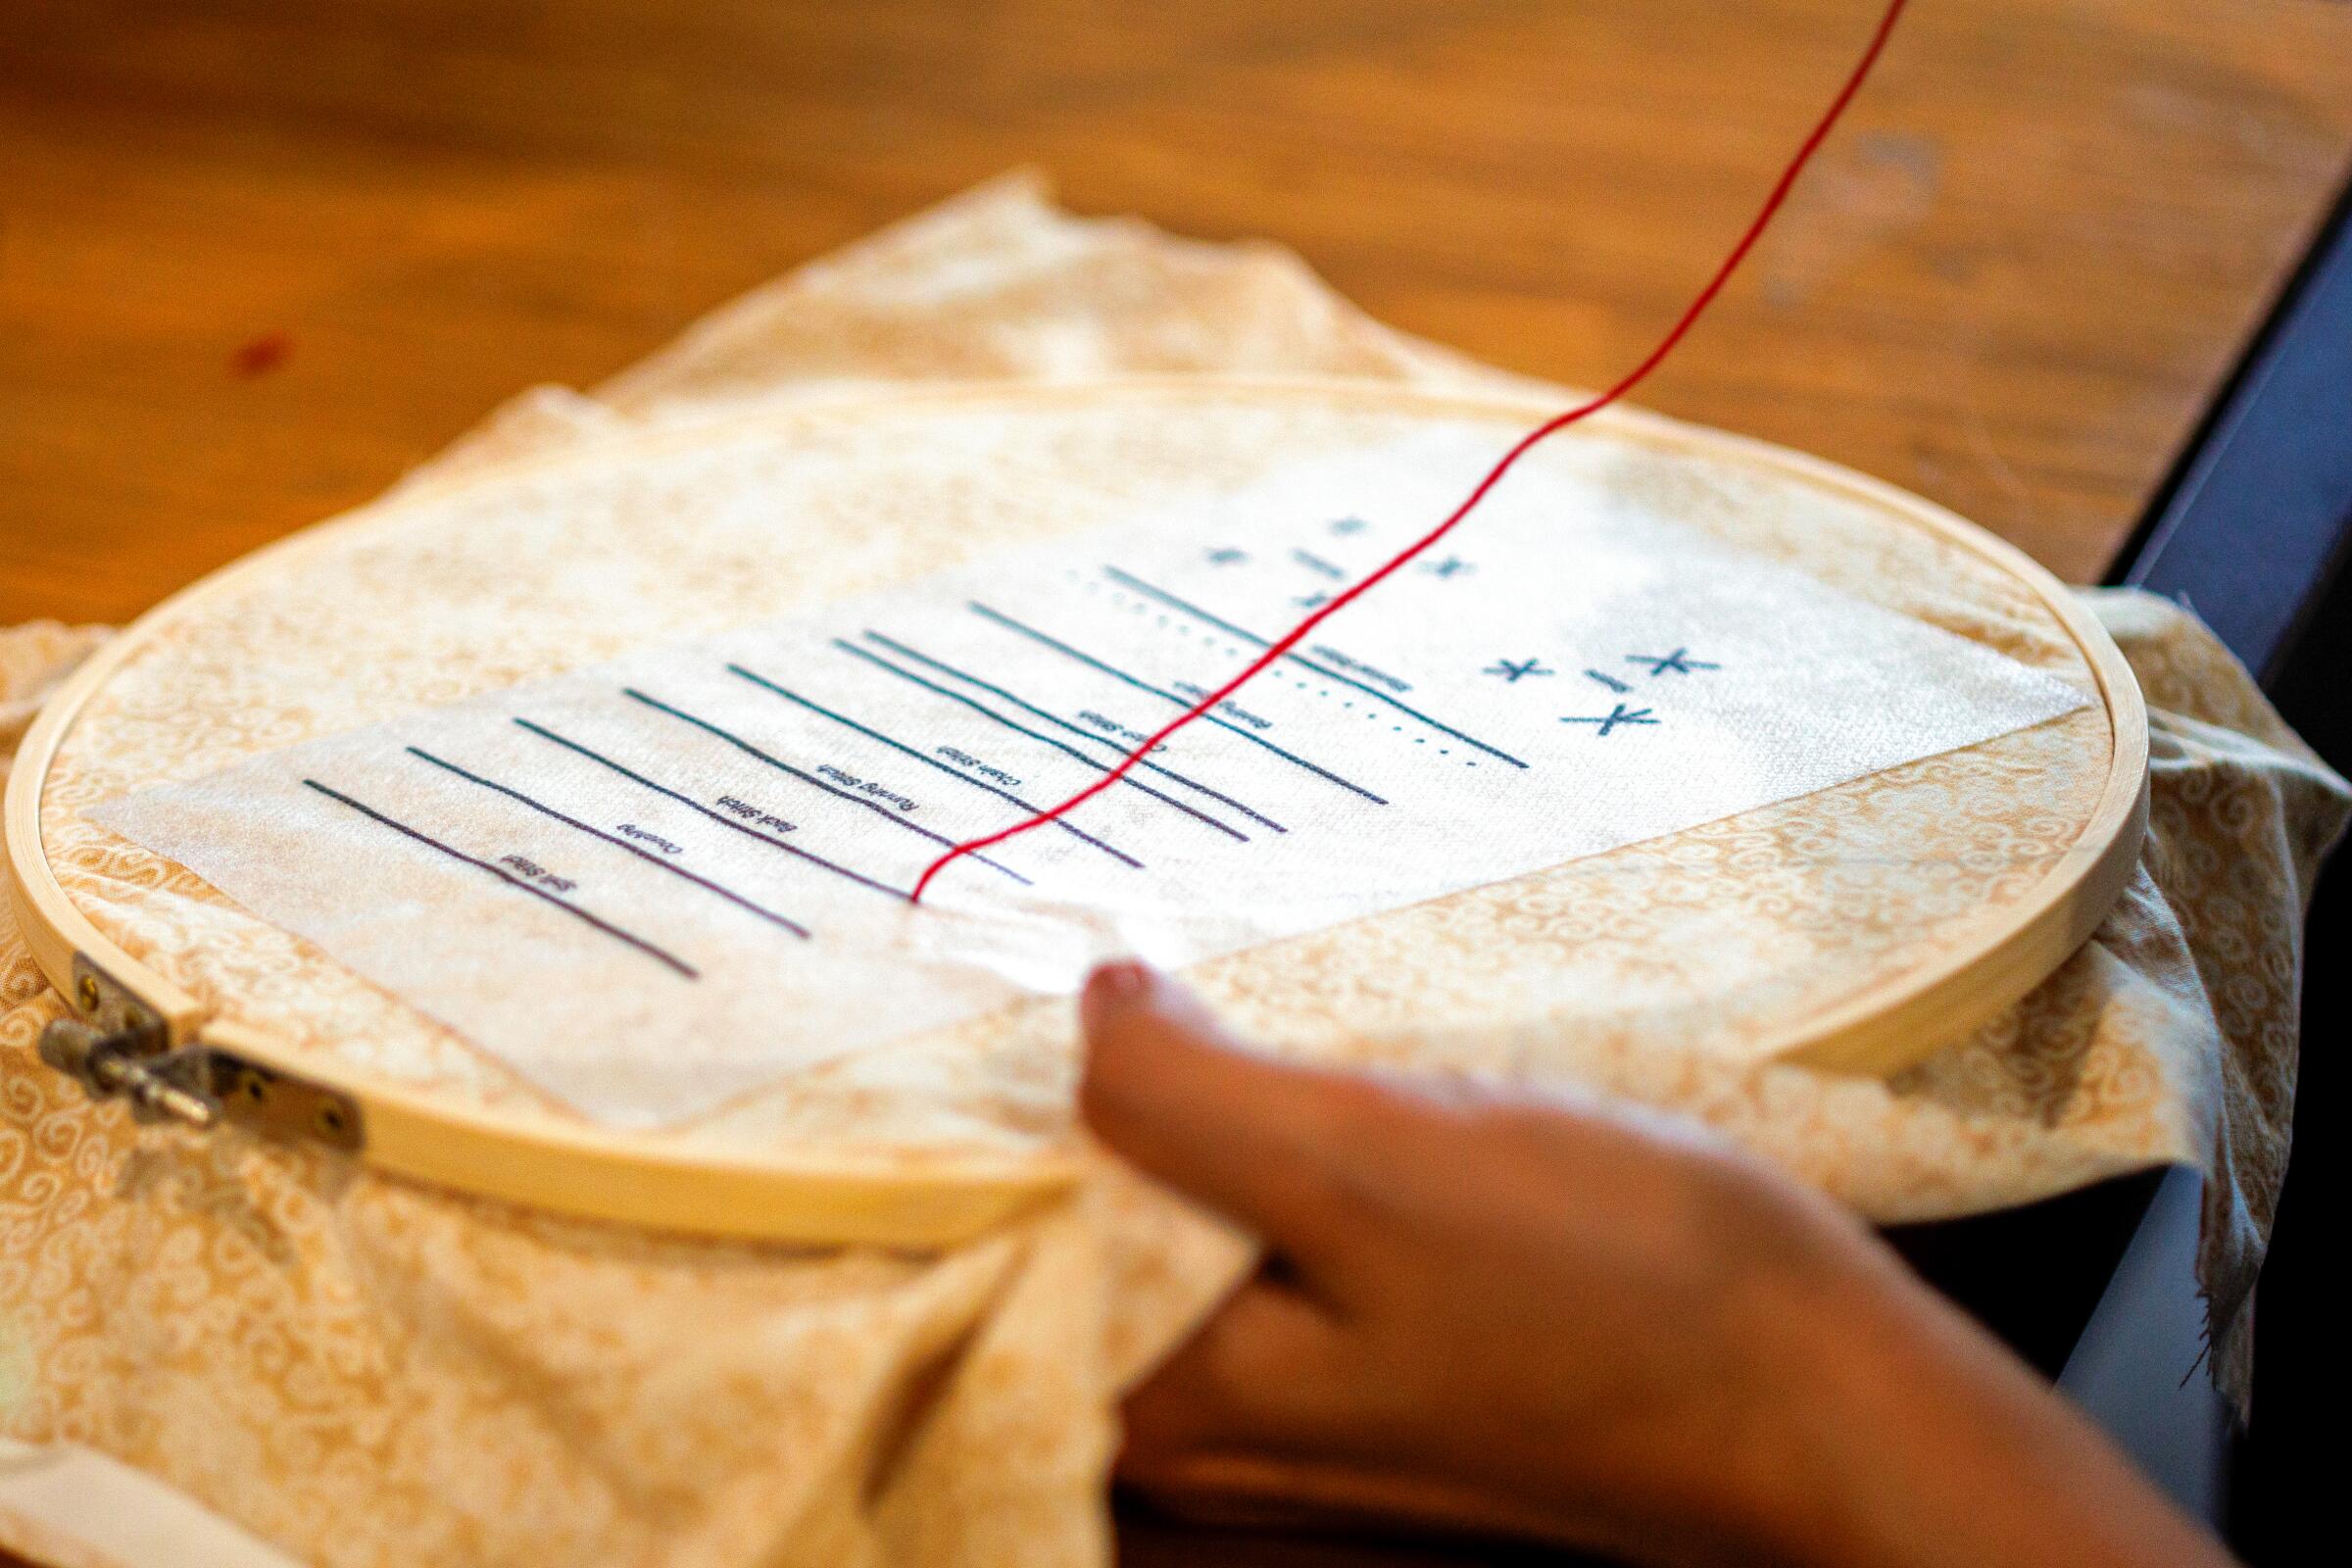 A closeup of someone using an embroidery hoop.